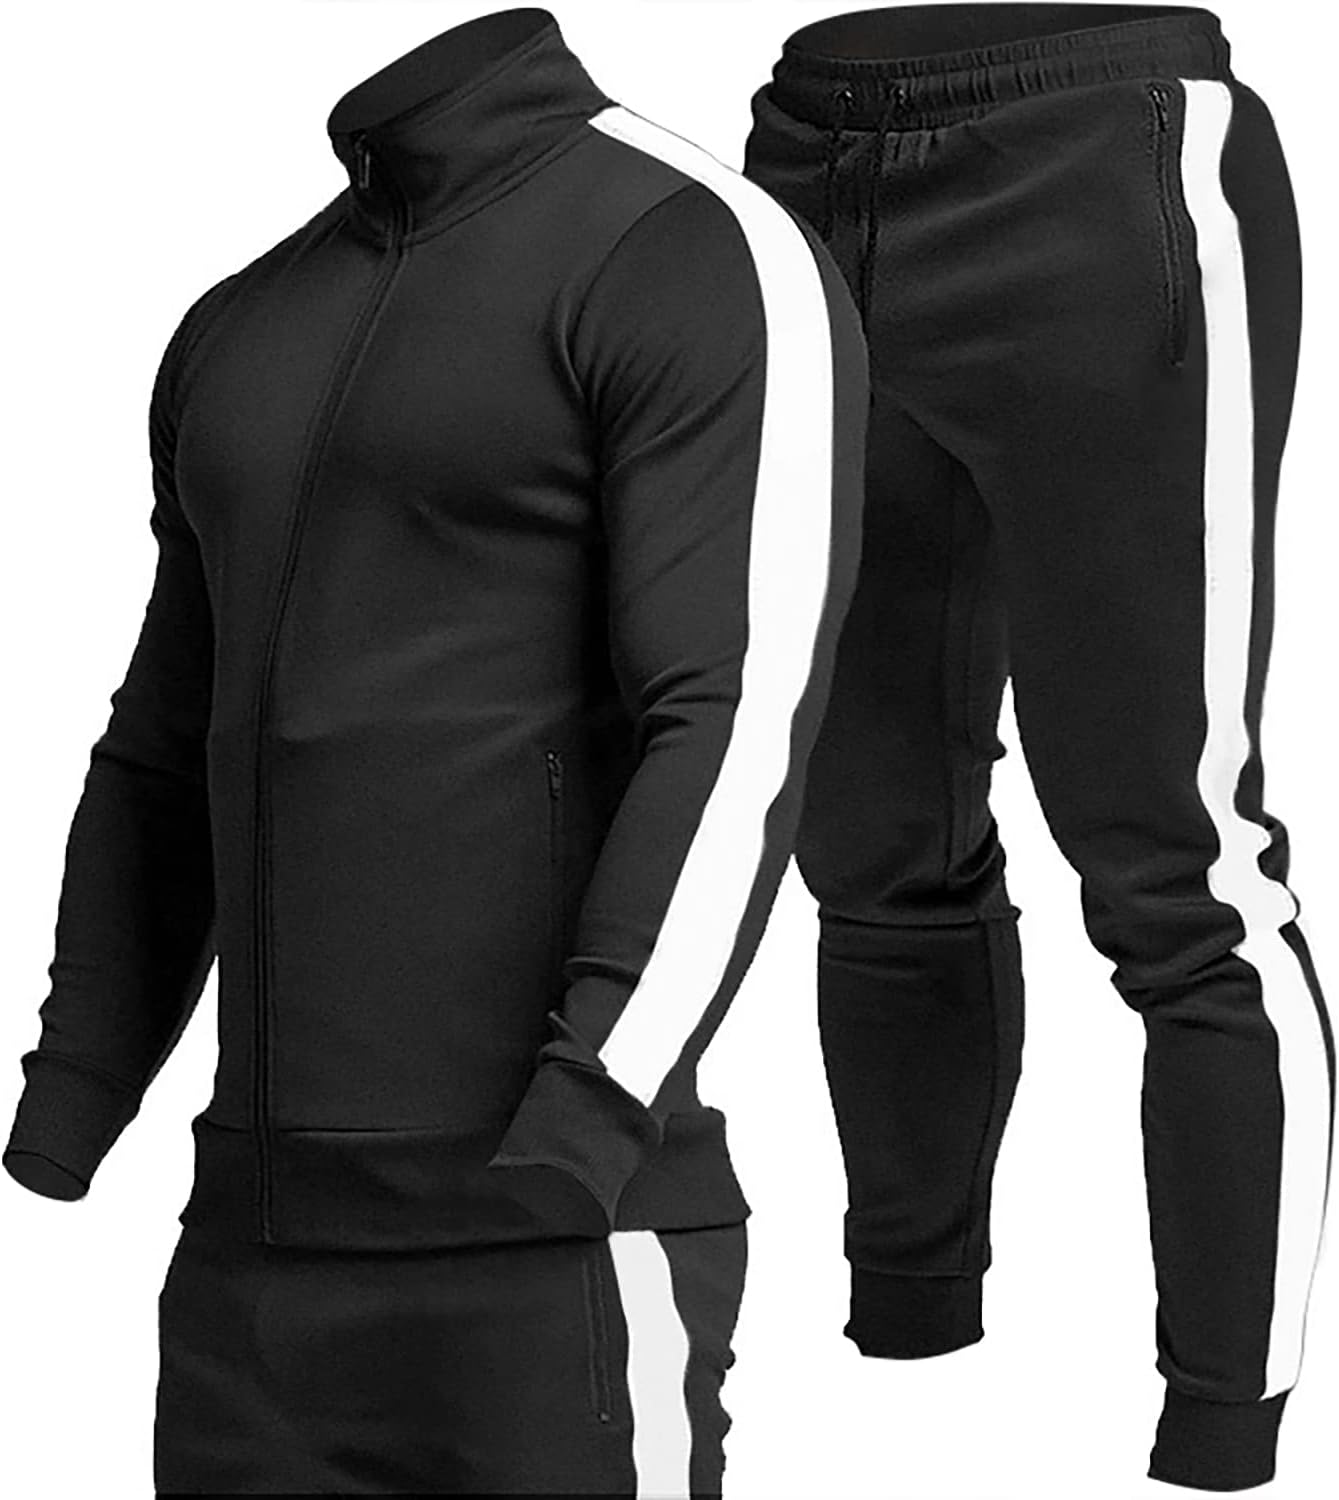 Buy YSENTOMen's Tracksuits 2 Pieces Jogging Suits Sets Athletic